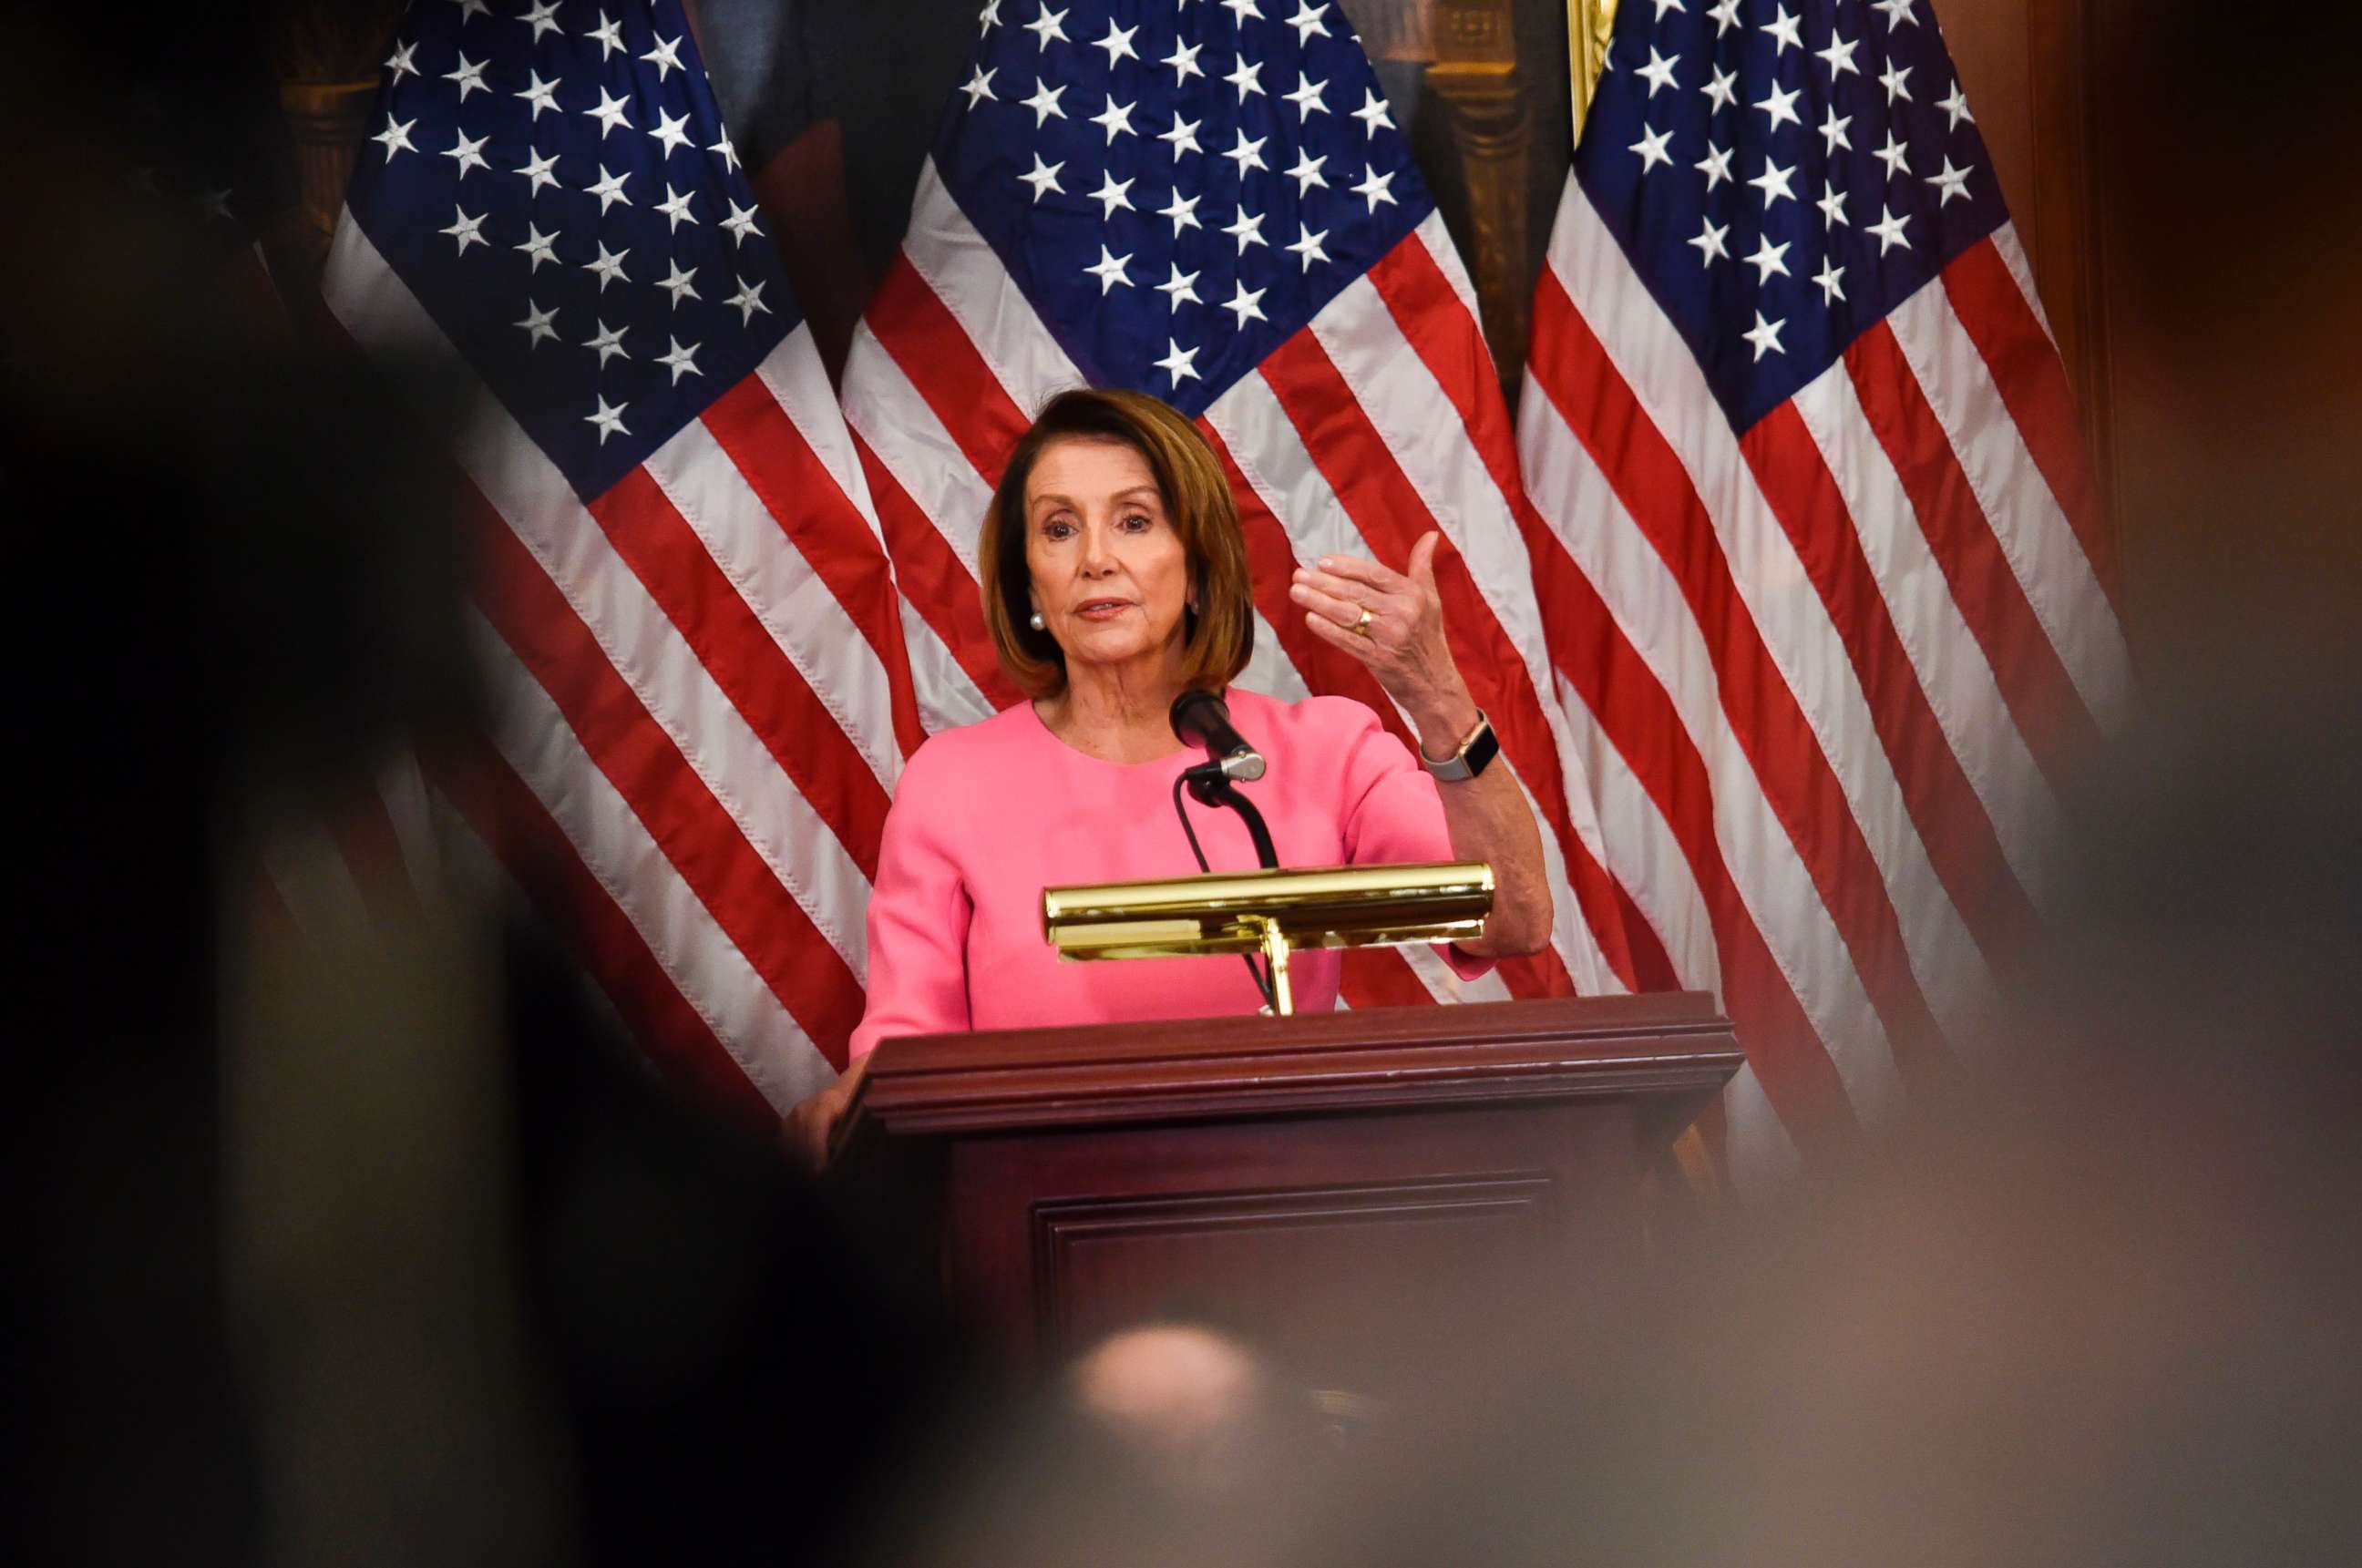 PHOTO: House Minority leader Nancy Pelosi speaks during a press conference after Democrats took back control of the house in Washington, D.C., Nov. 7, 2018.